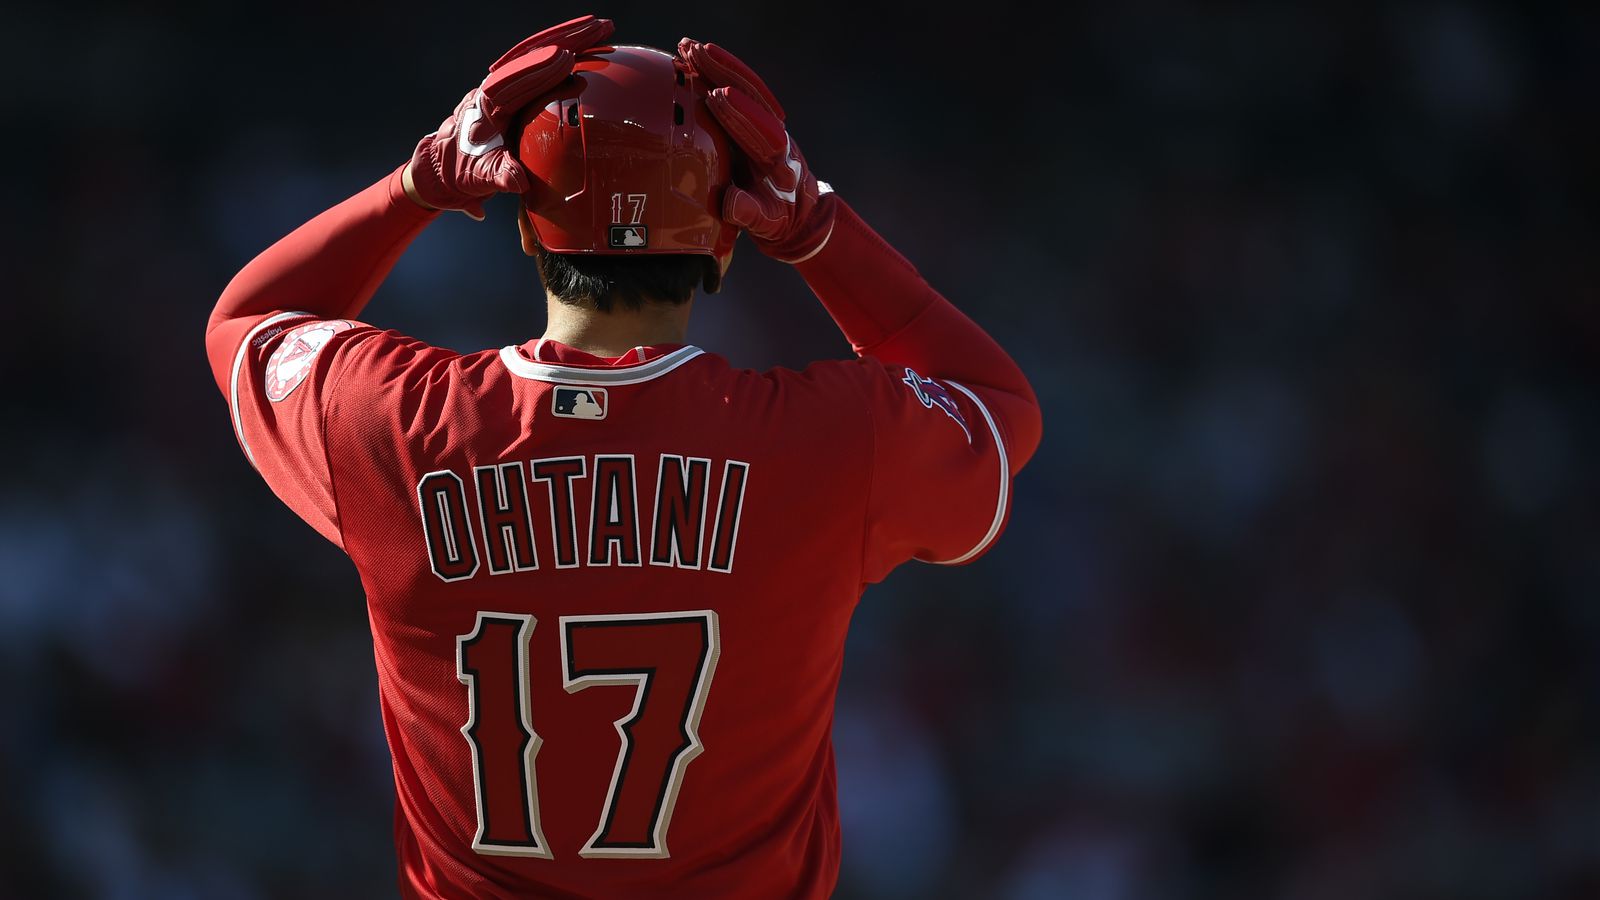 Shohei ohtani has a week of wonderful hes not done